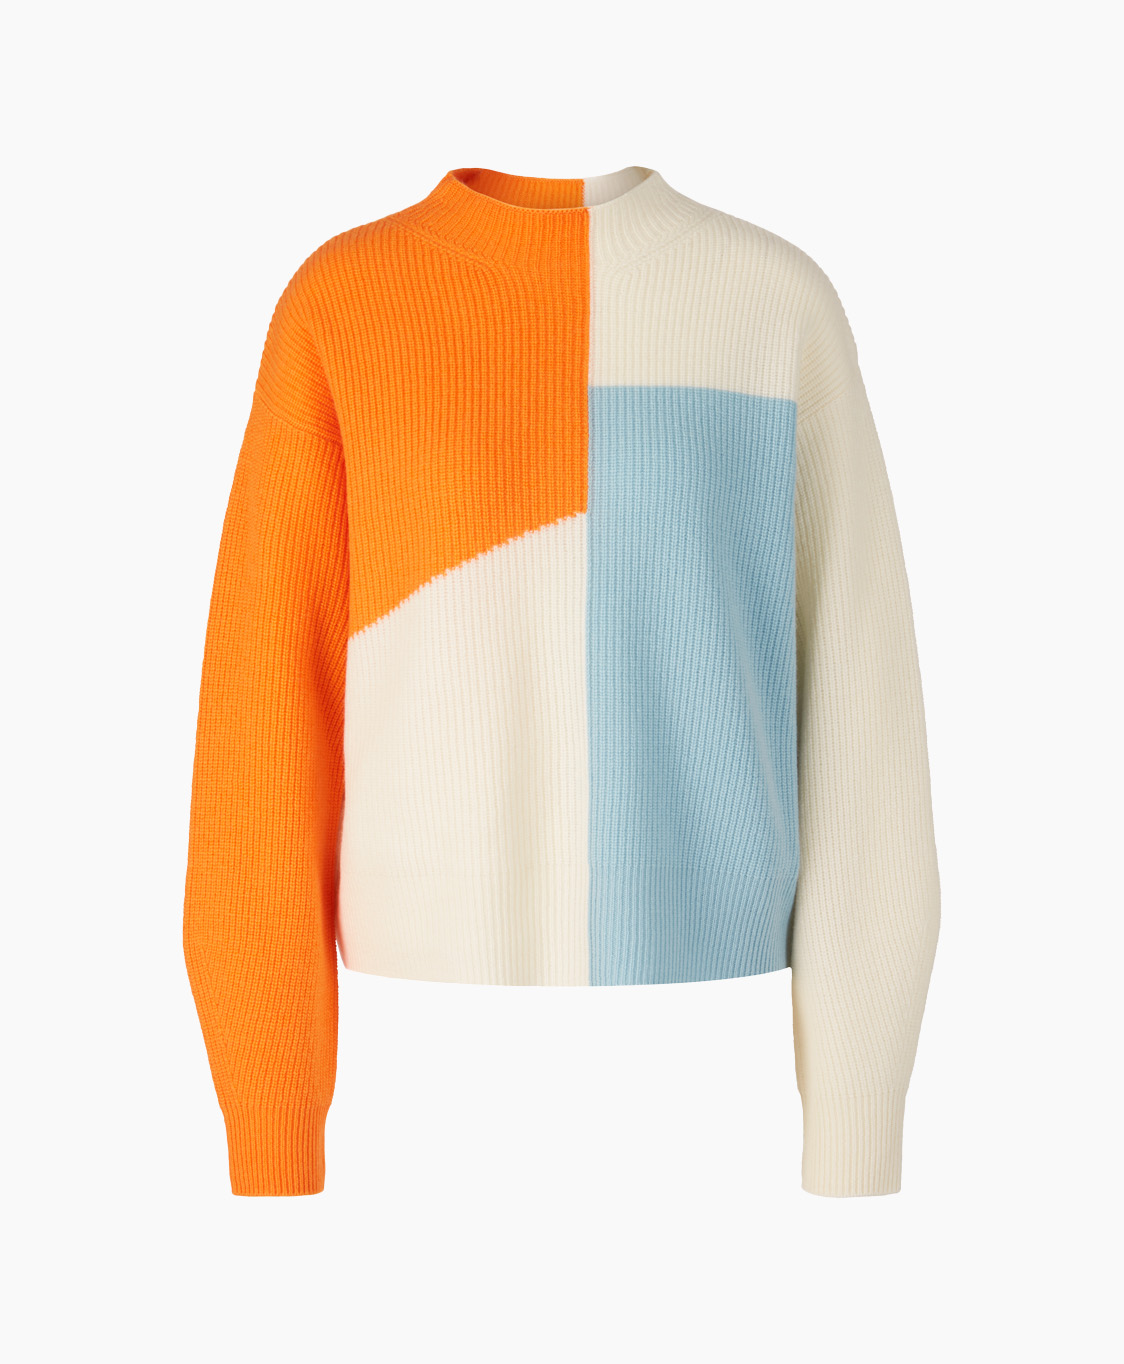 Marccain Collectie Pullover Uc 41.09 M54 Peach